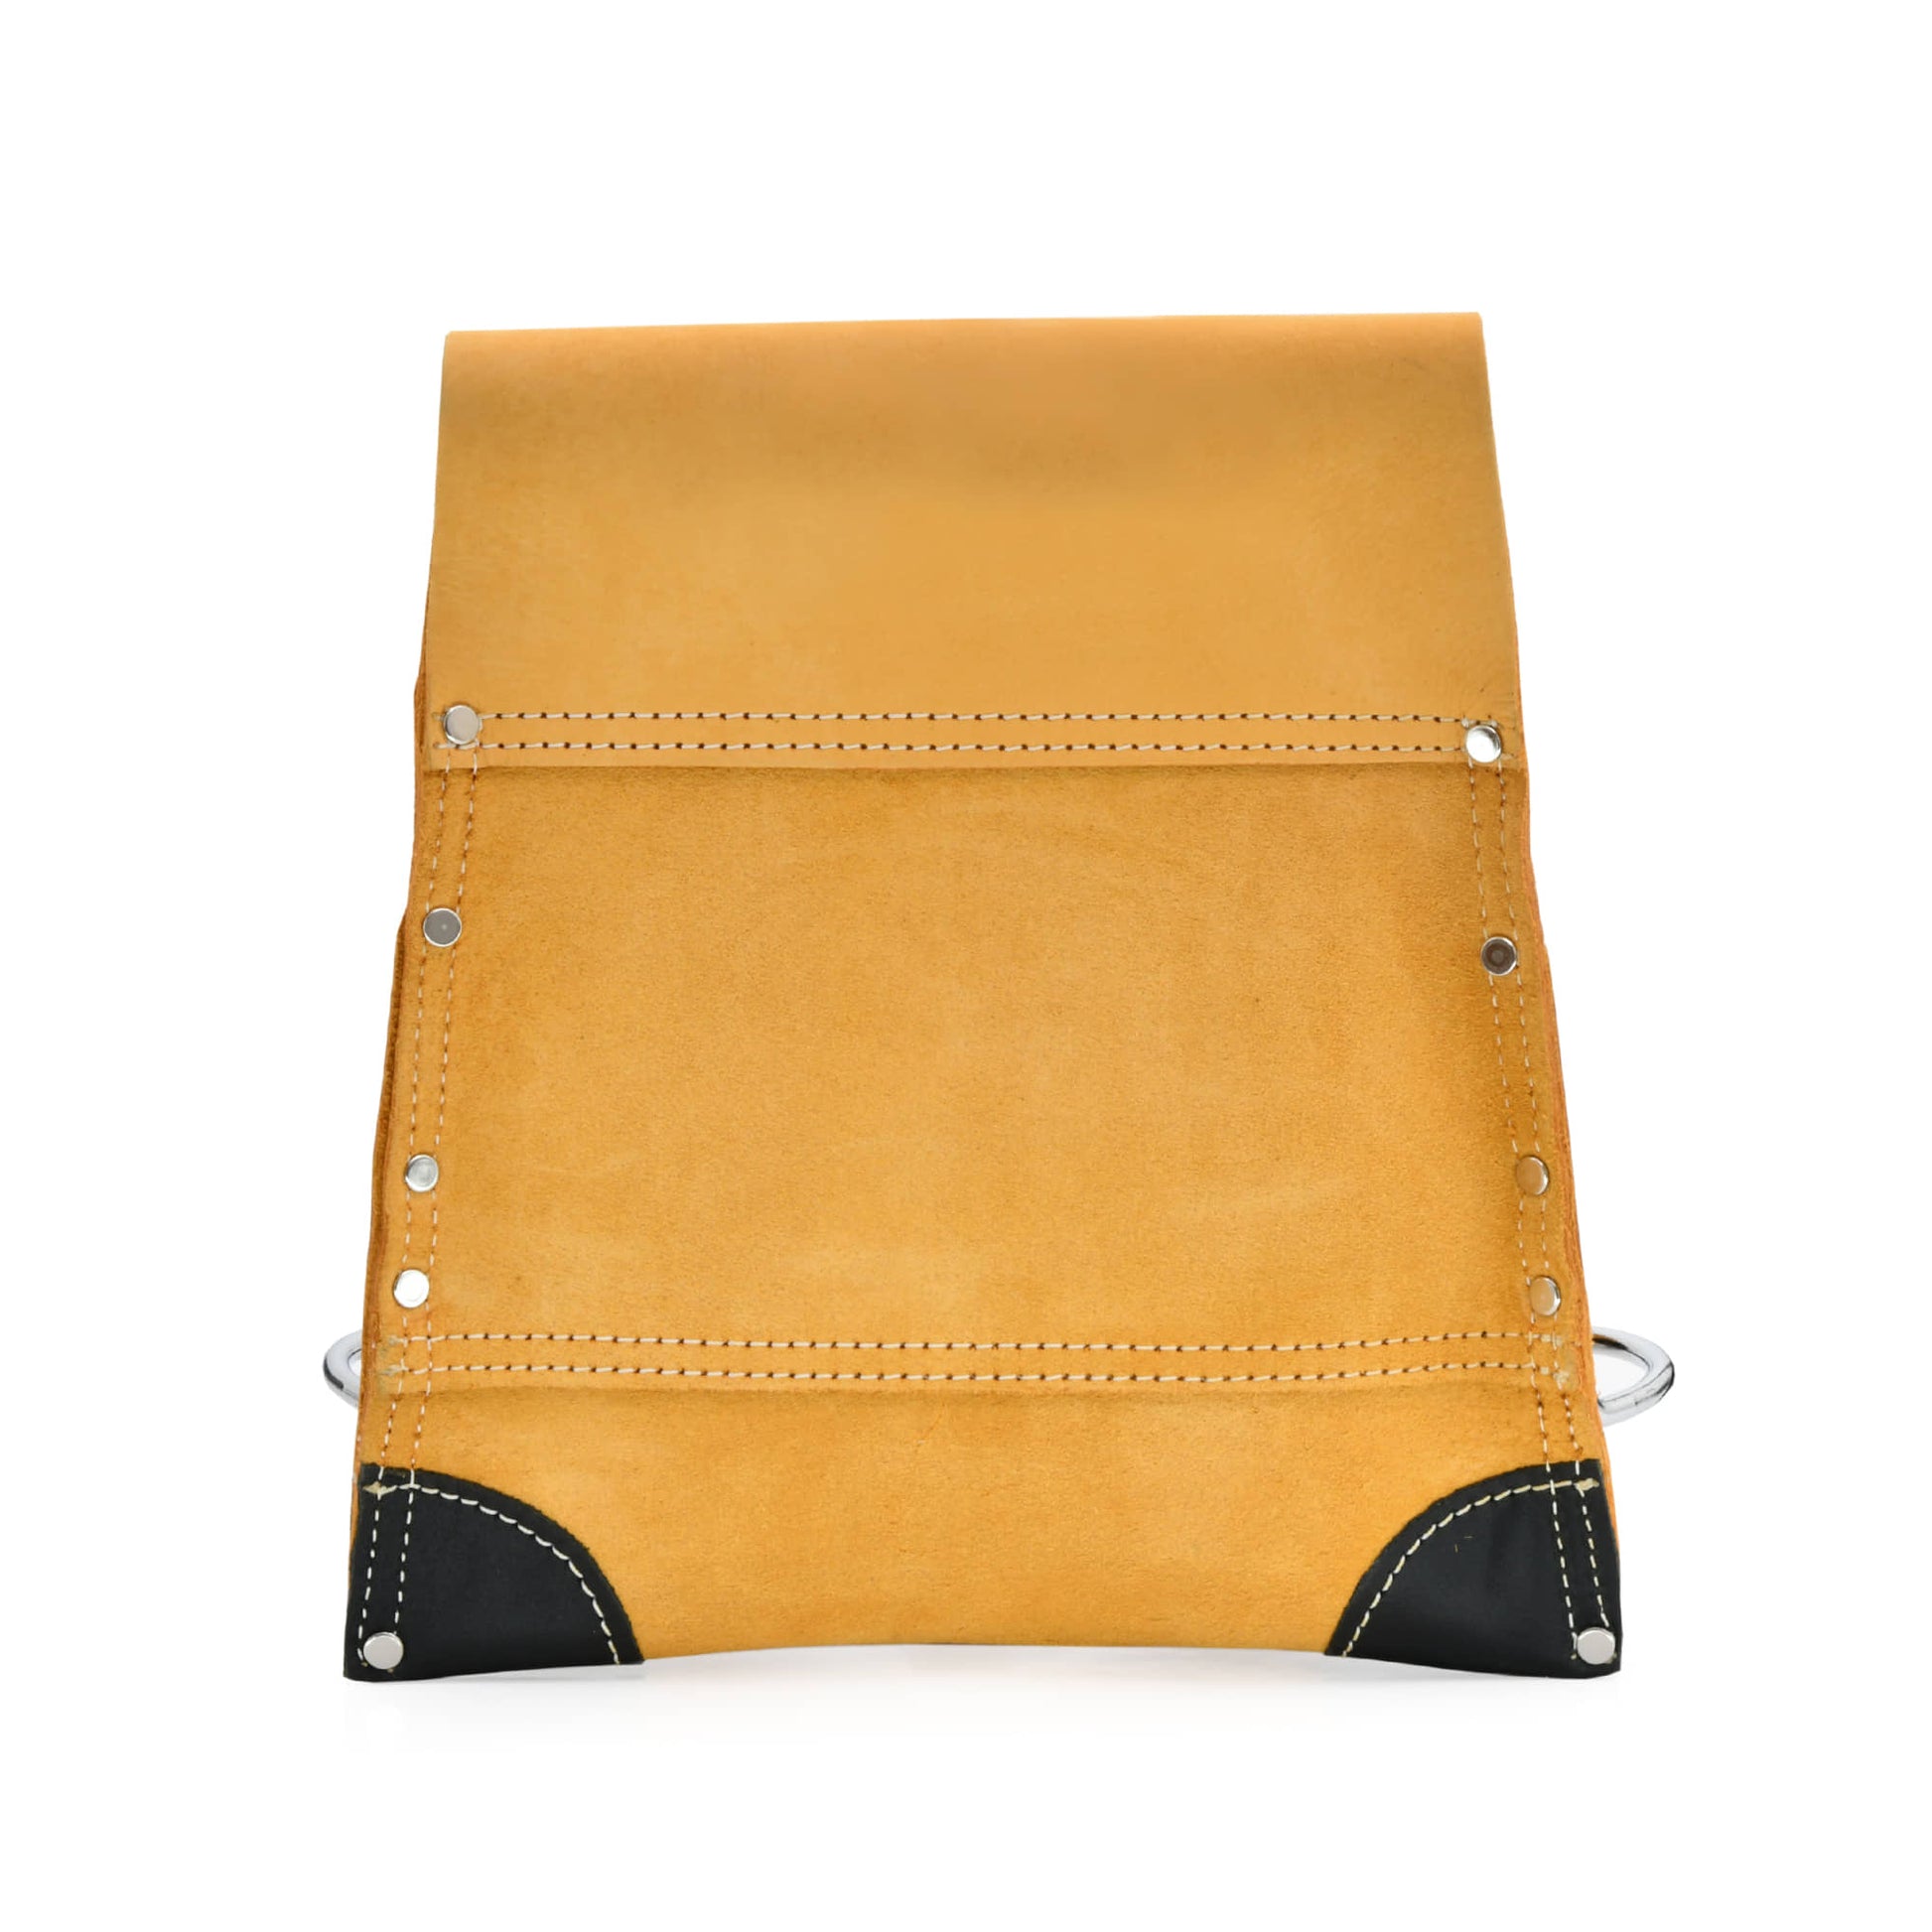 Style n Craft's 93823 - 8 Pocket Carpenter's Nail & Tool Pouch in Yellow Full Grain Leather with Reinforced Corners - Back View